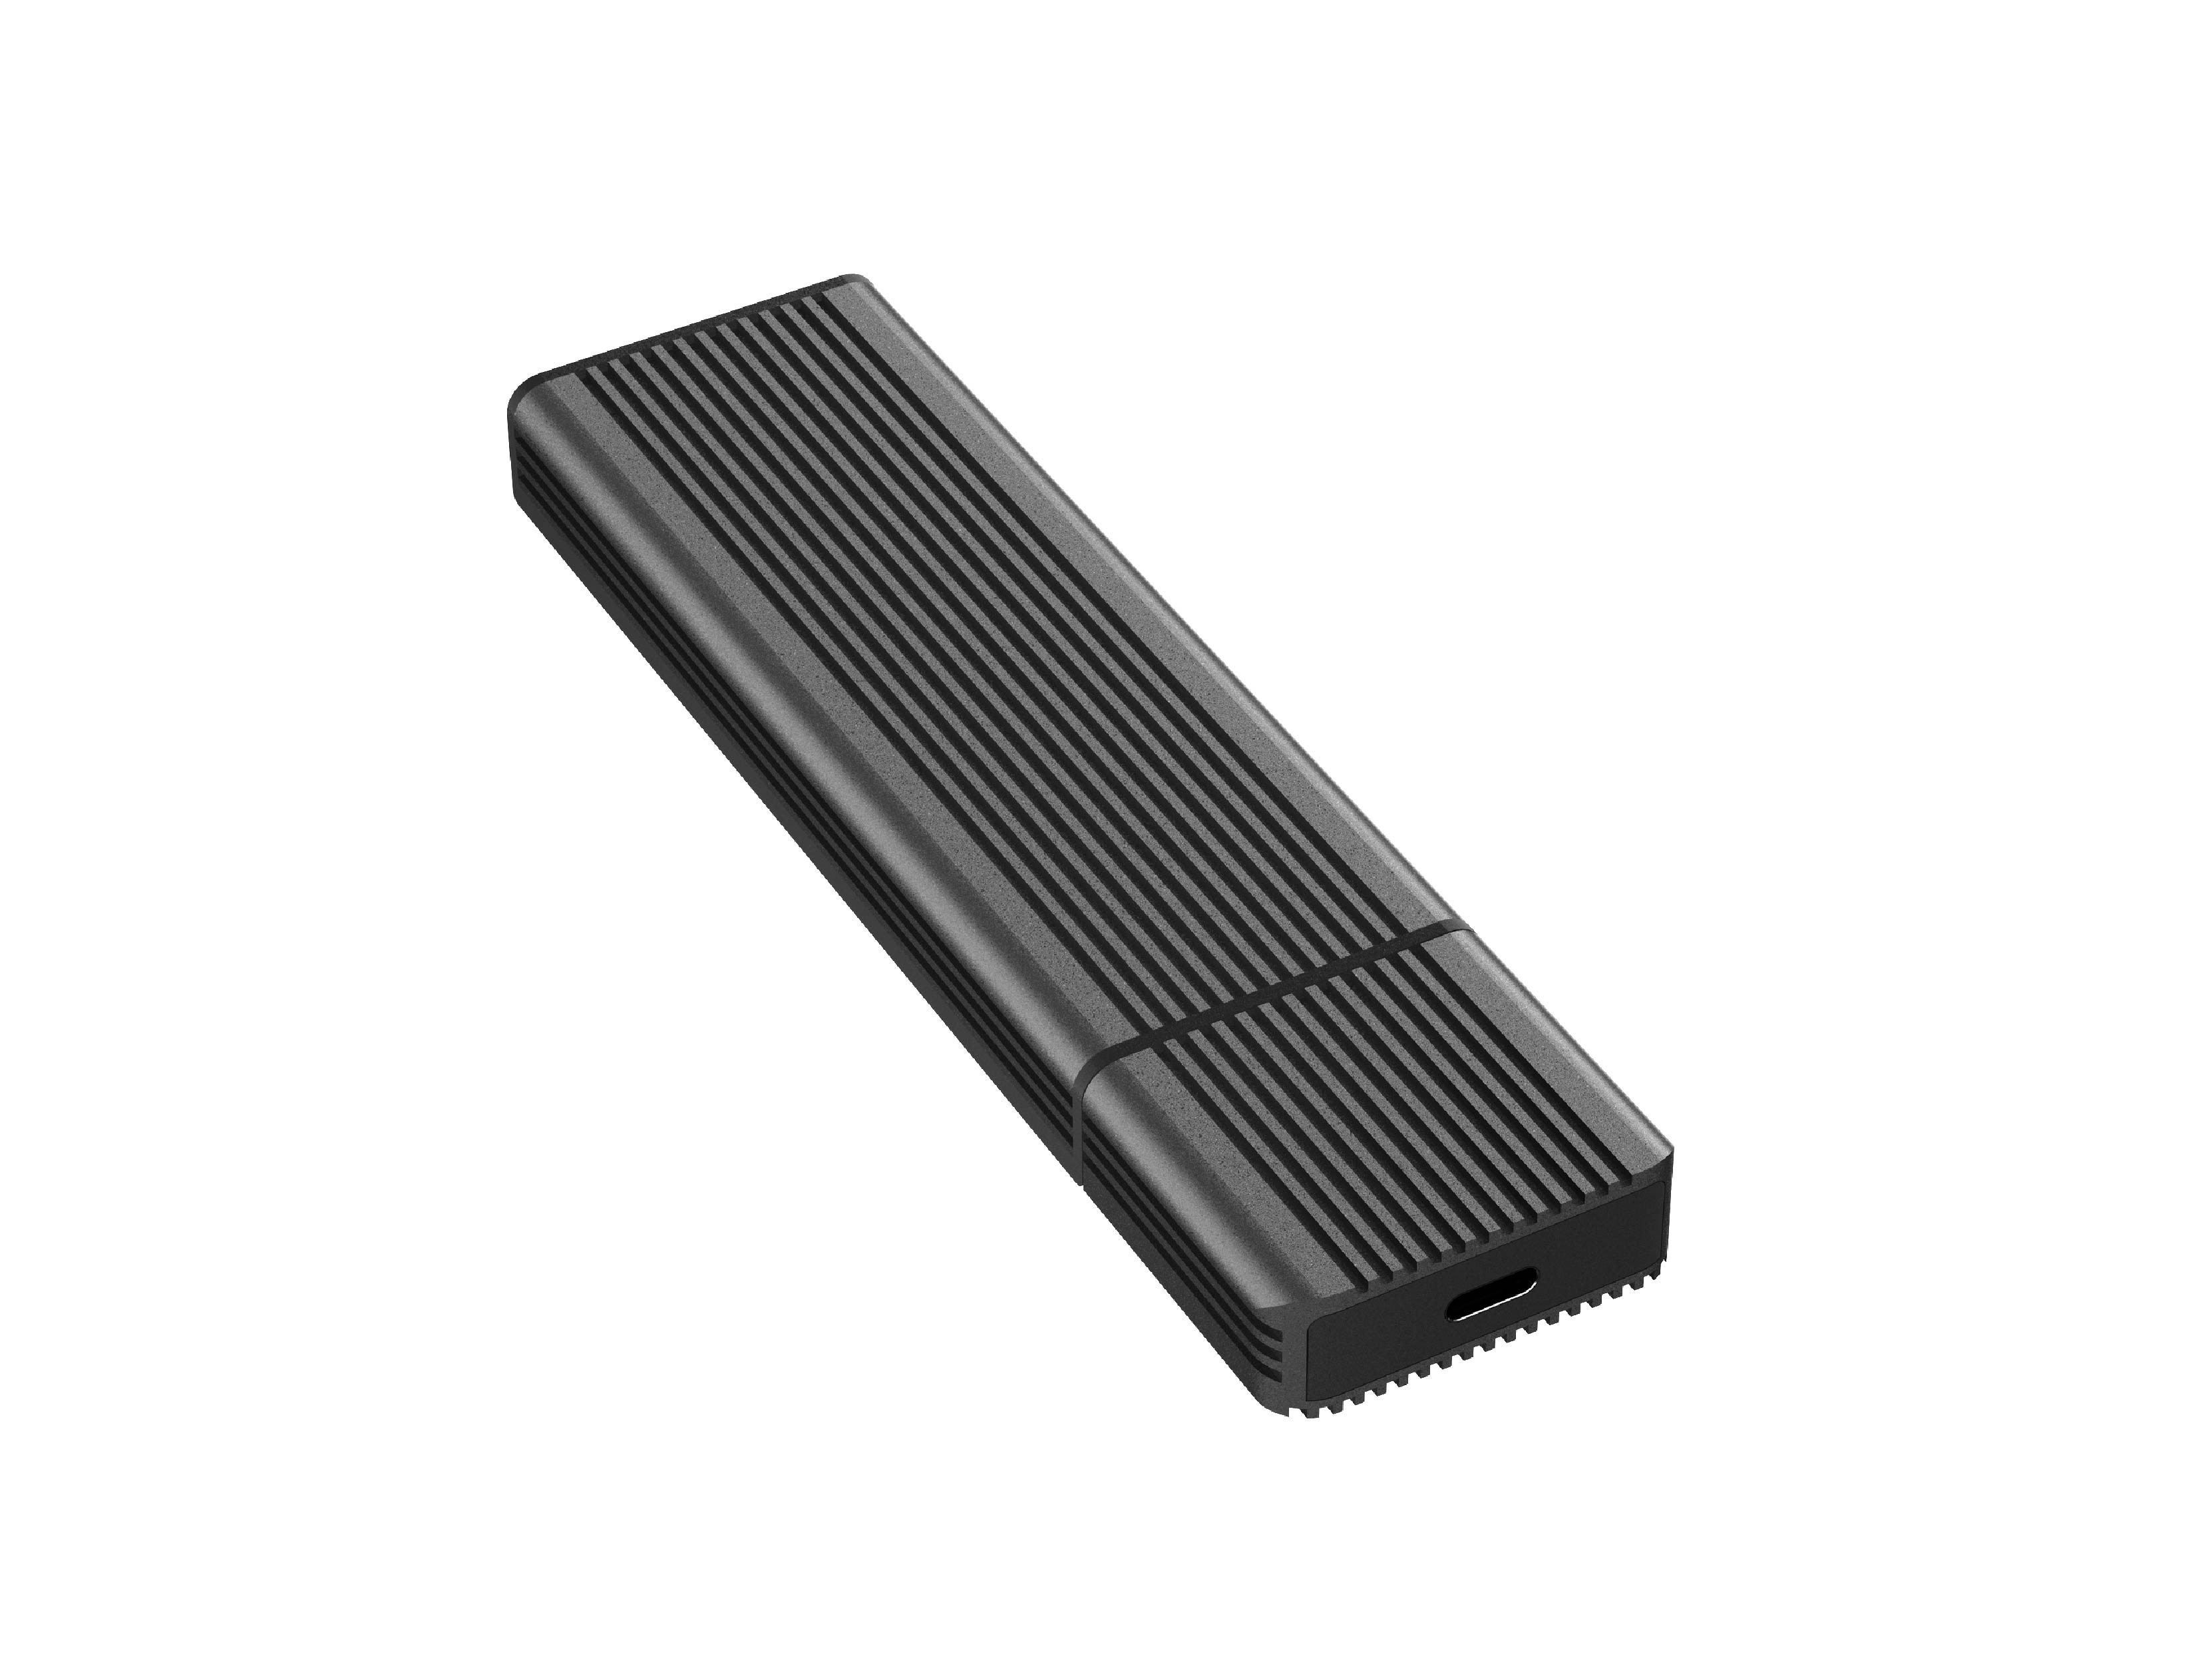 Portable M.2 NVMe SSD Reader (SI-8007US31C), Support 1 M-key M.2 NVMe SSD 10Gbps, World patent, use the clips to switch SSDs, USB-C to host.